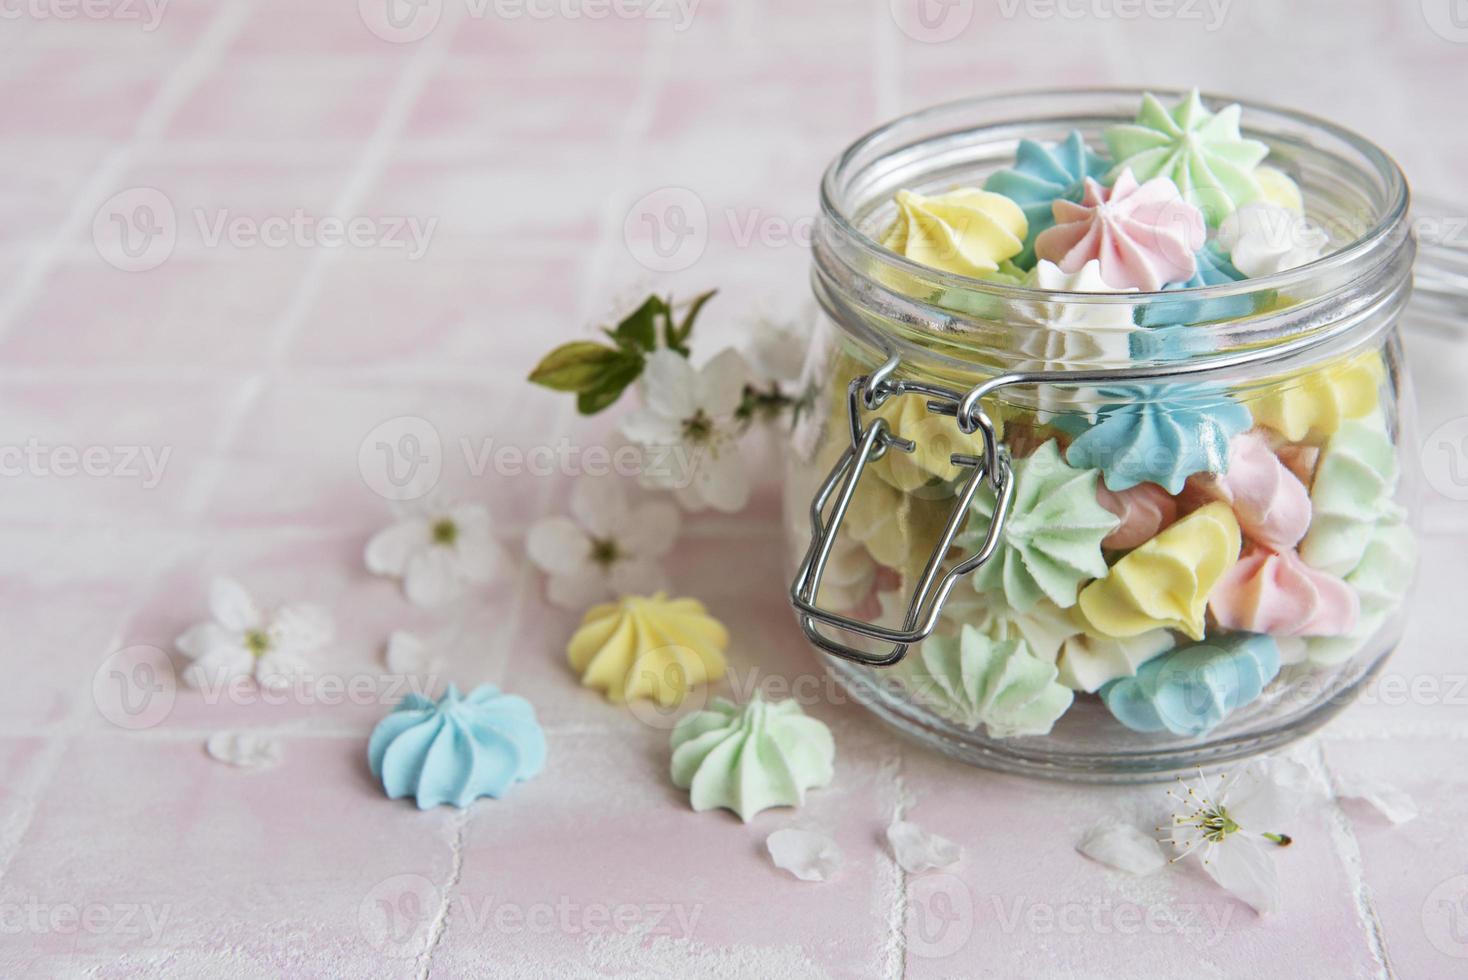 Small colorful meringues in the glass jar photo